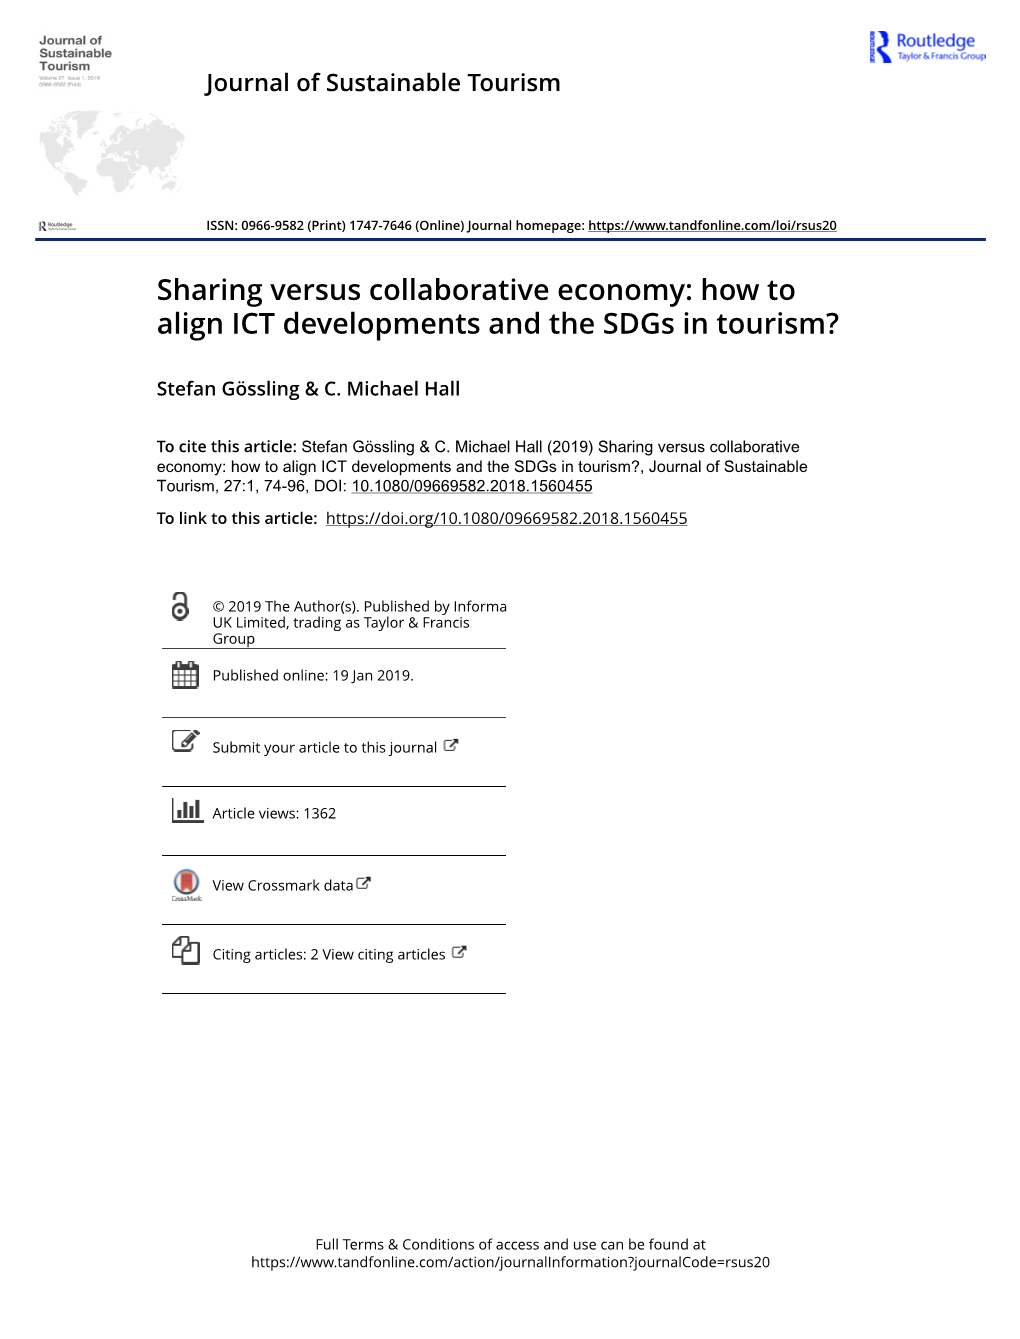 How to Align ICT Developments and the Sdgs in Tourism?